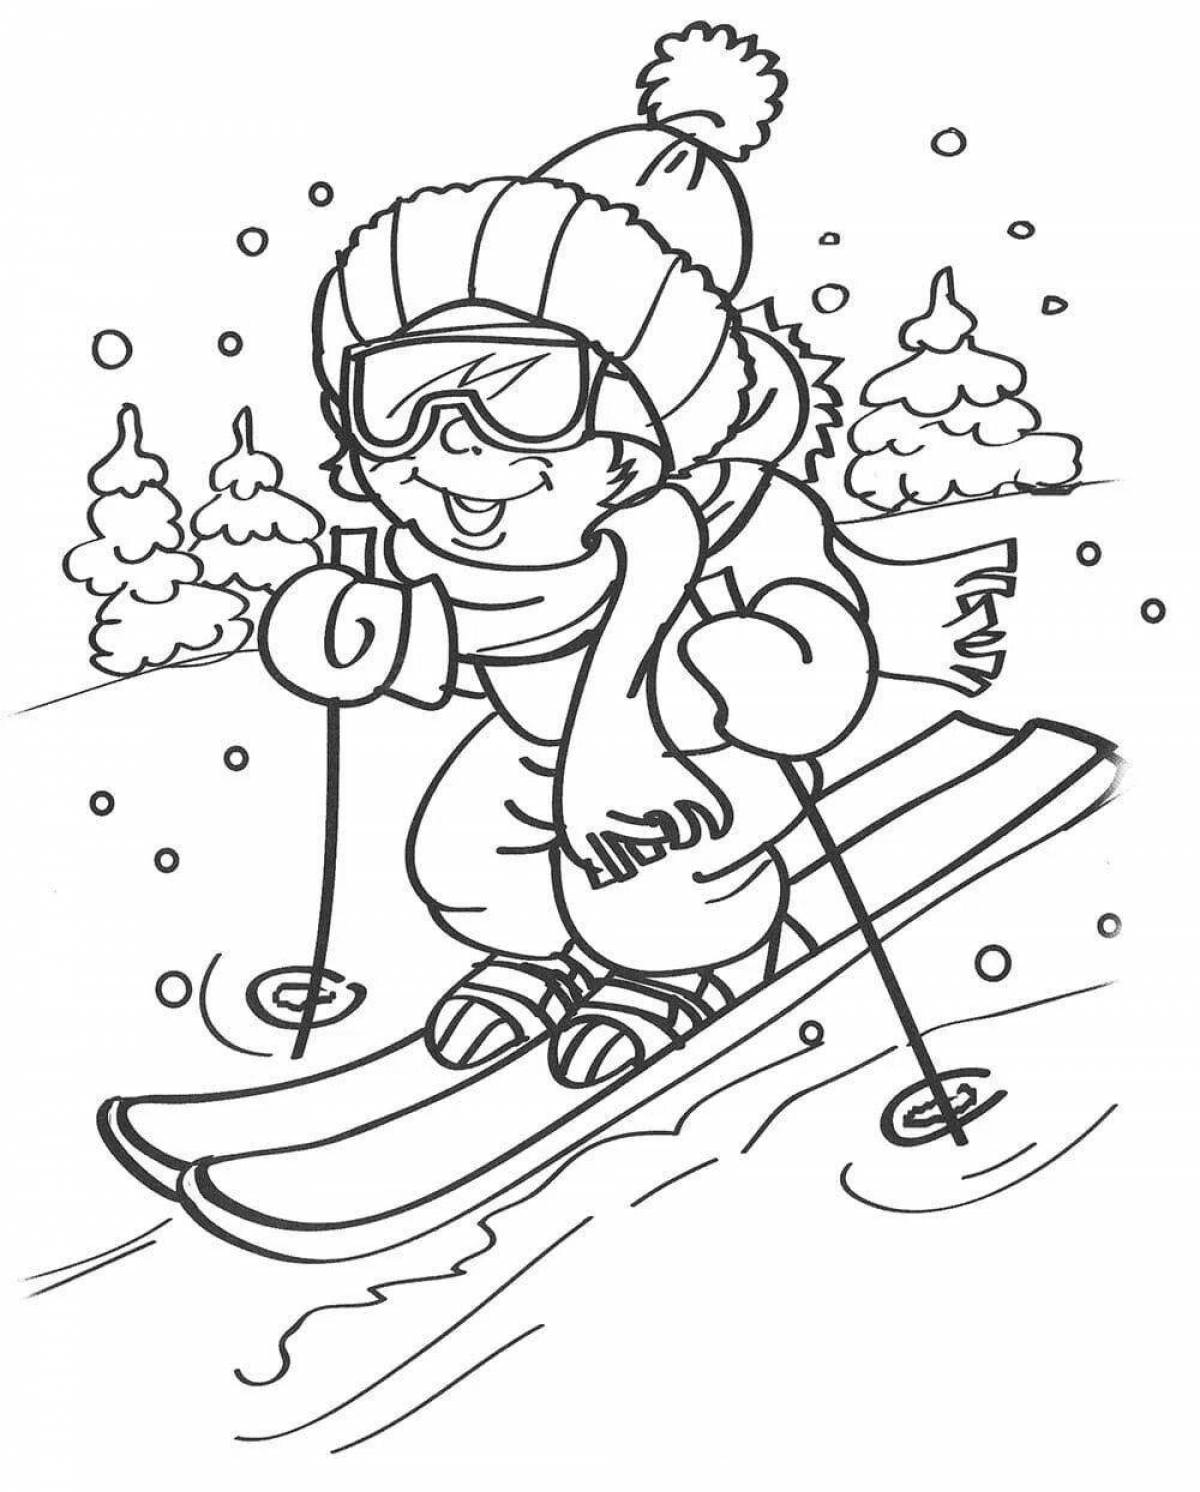 Fun skiing coloring book for students